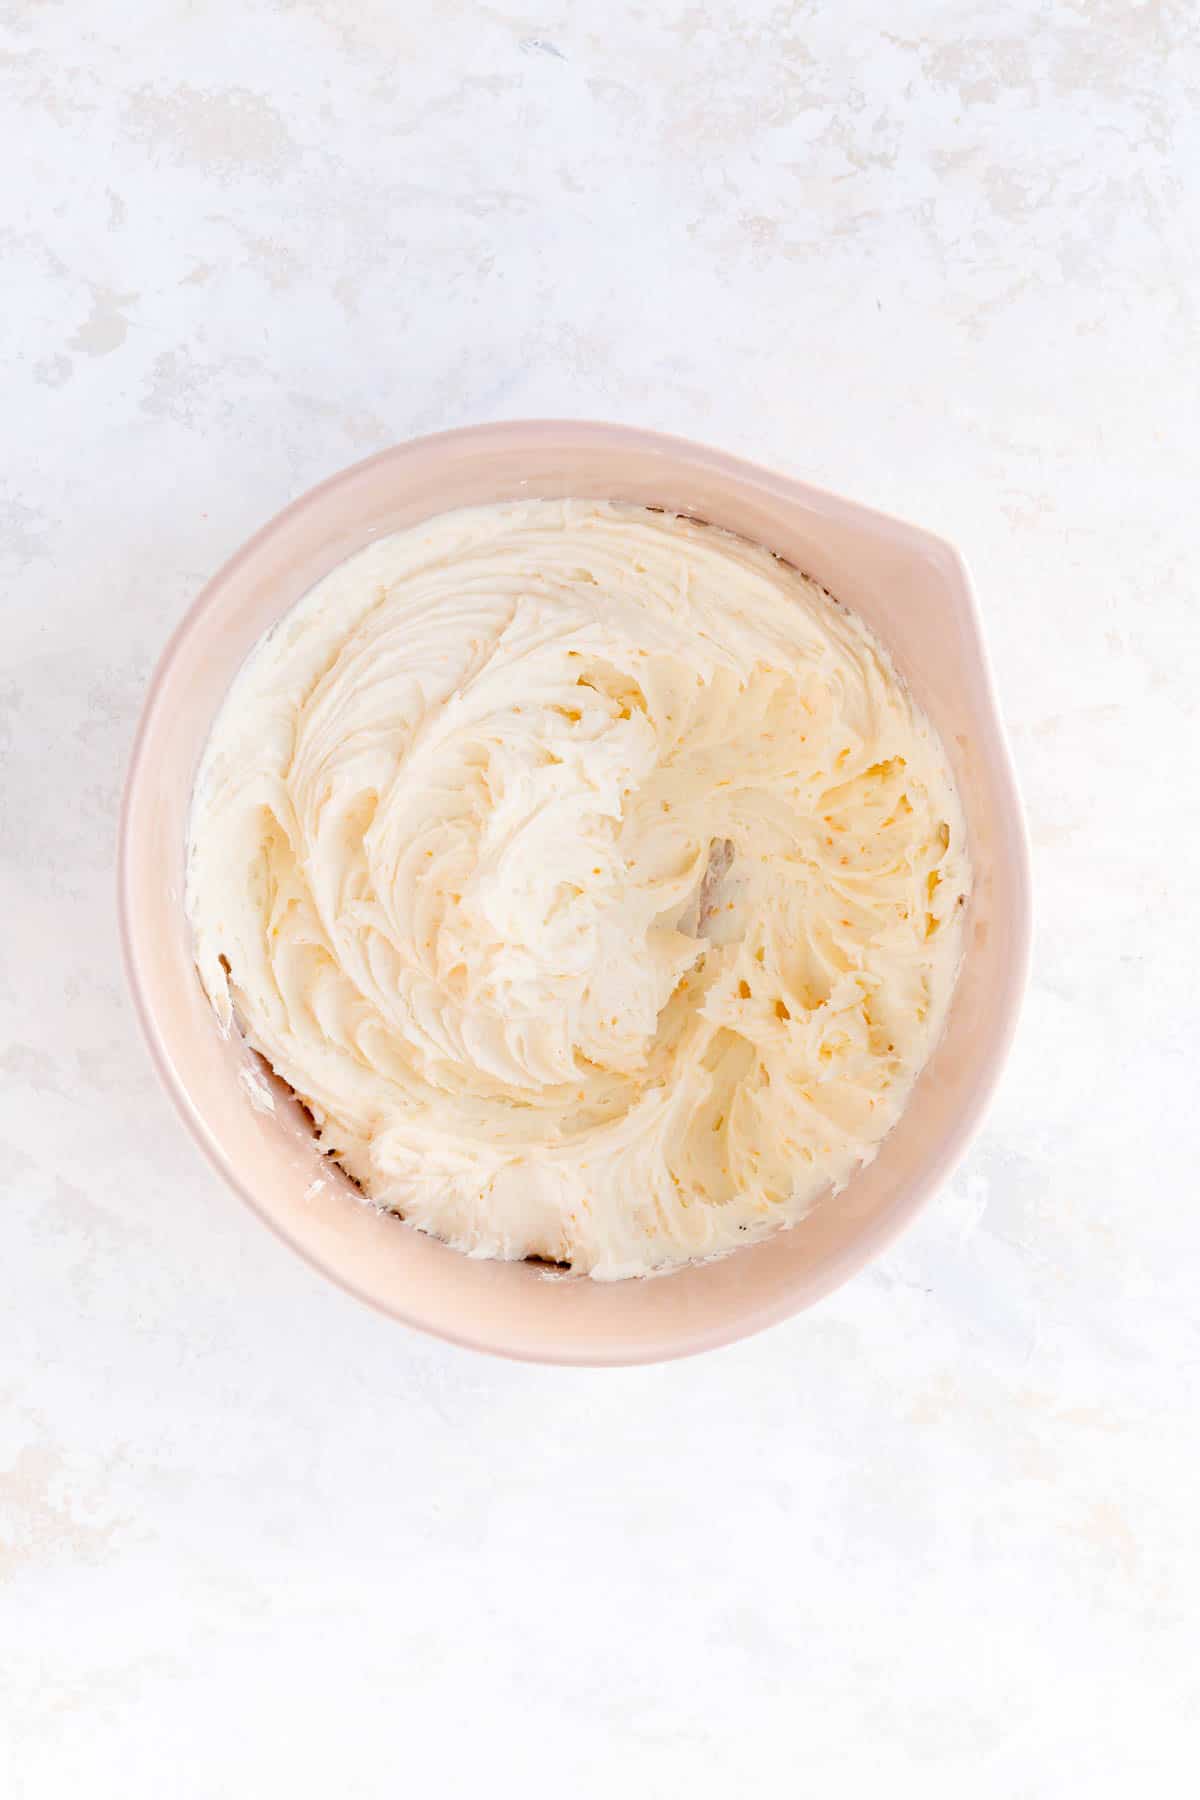 Orange cream frosting fully mixed in with in a brown bowl on a white background